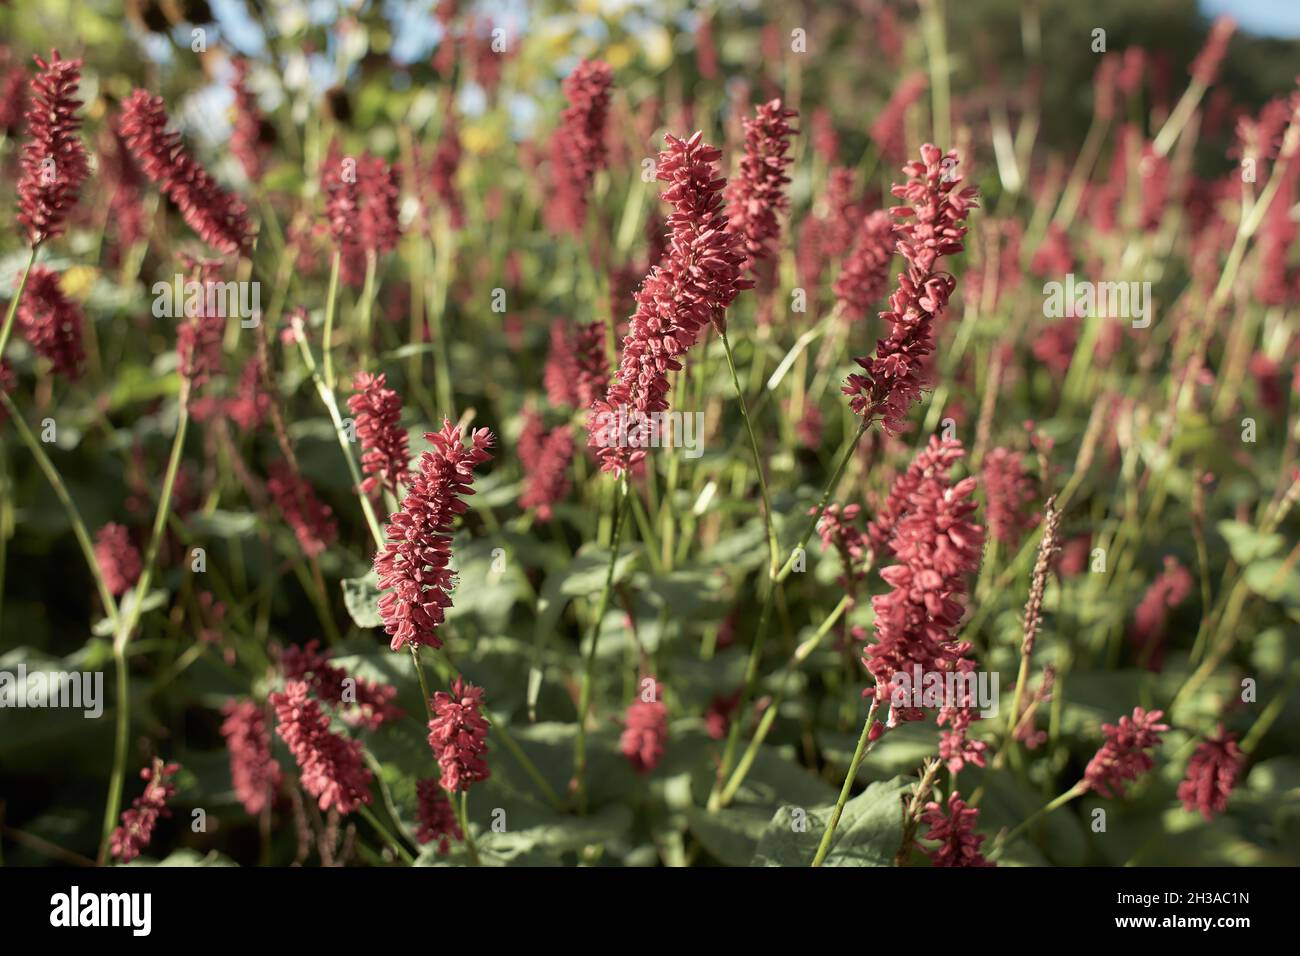 Selective focus of red flower Persicaria amplexicaulis in the garden with soft sunlight, Knotweed is a genus of herbaceous flowering plants, Polygonac Stock Photo